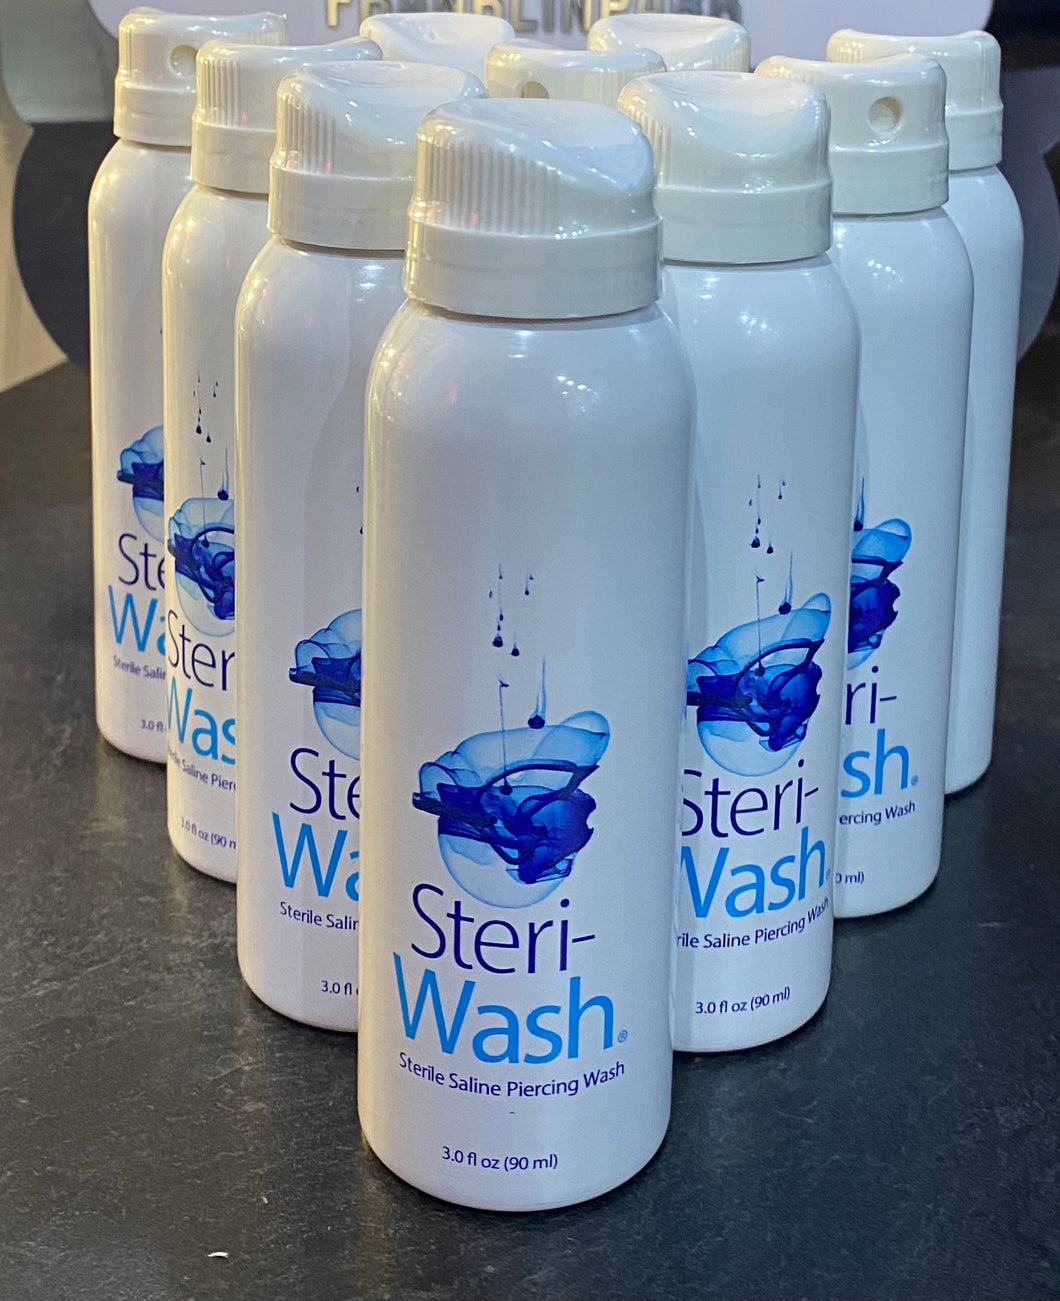 Steri-Wash Piercing Aftercare